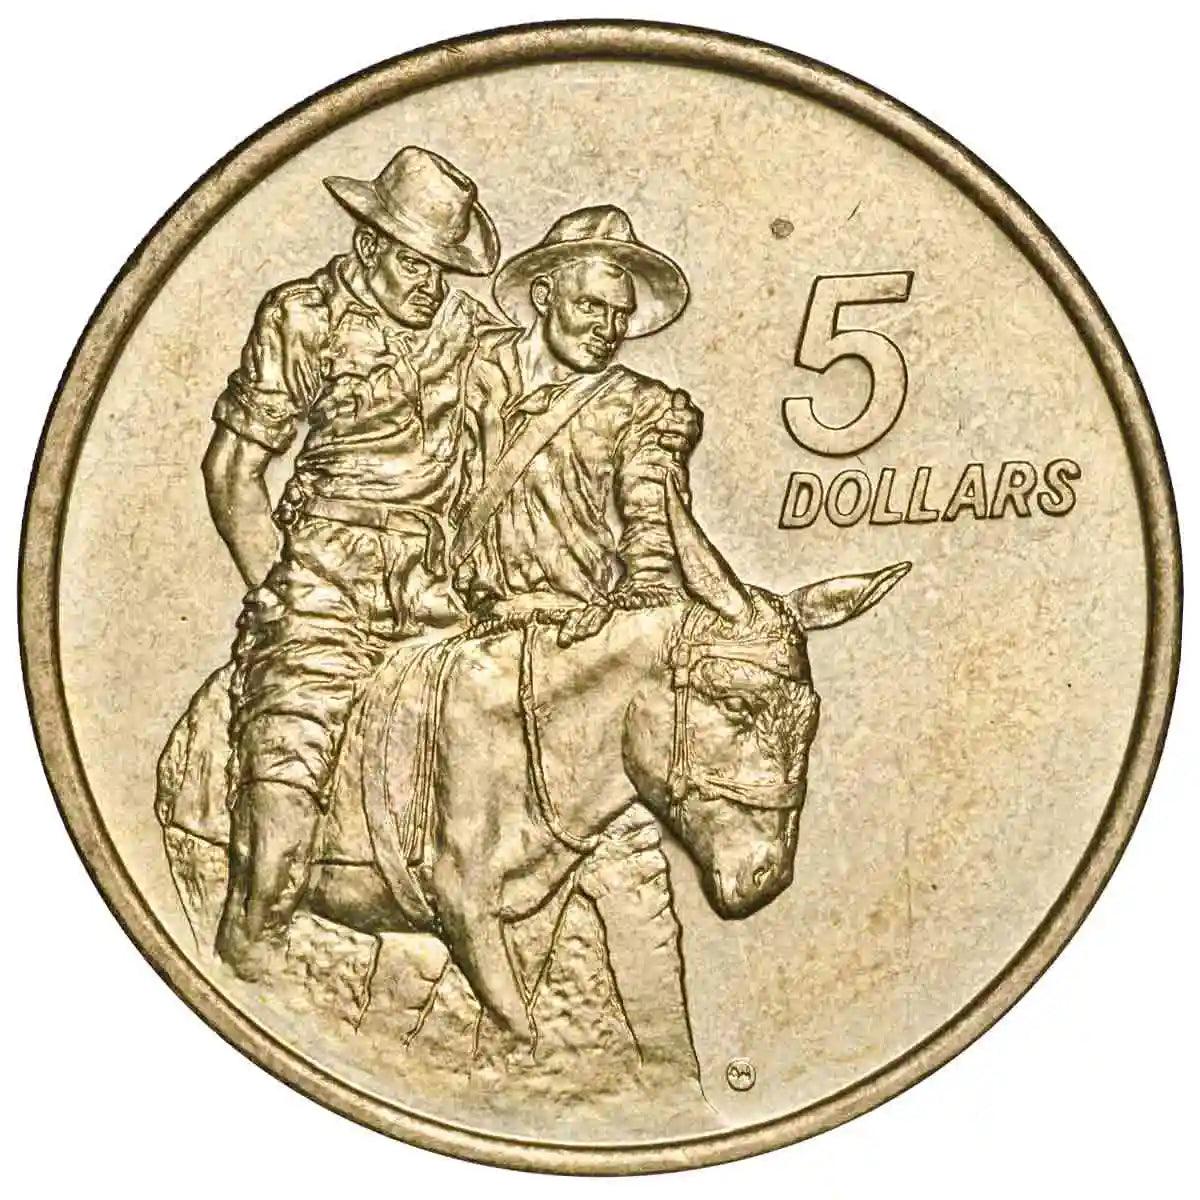 1990 $5 Coin - ANZAC 75th Anniversary - Loose Change Coins